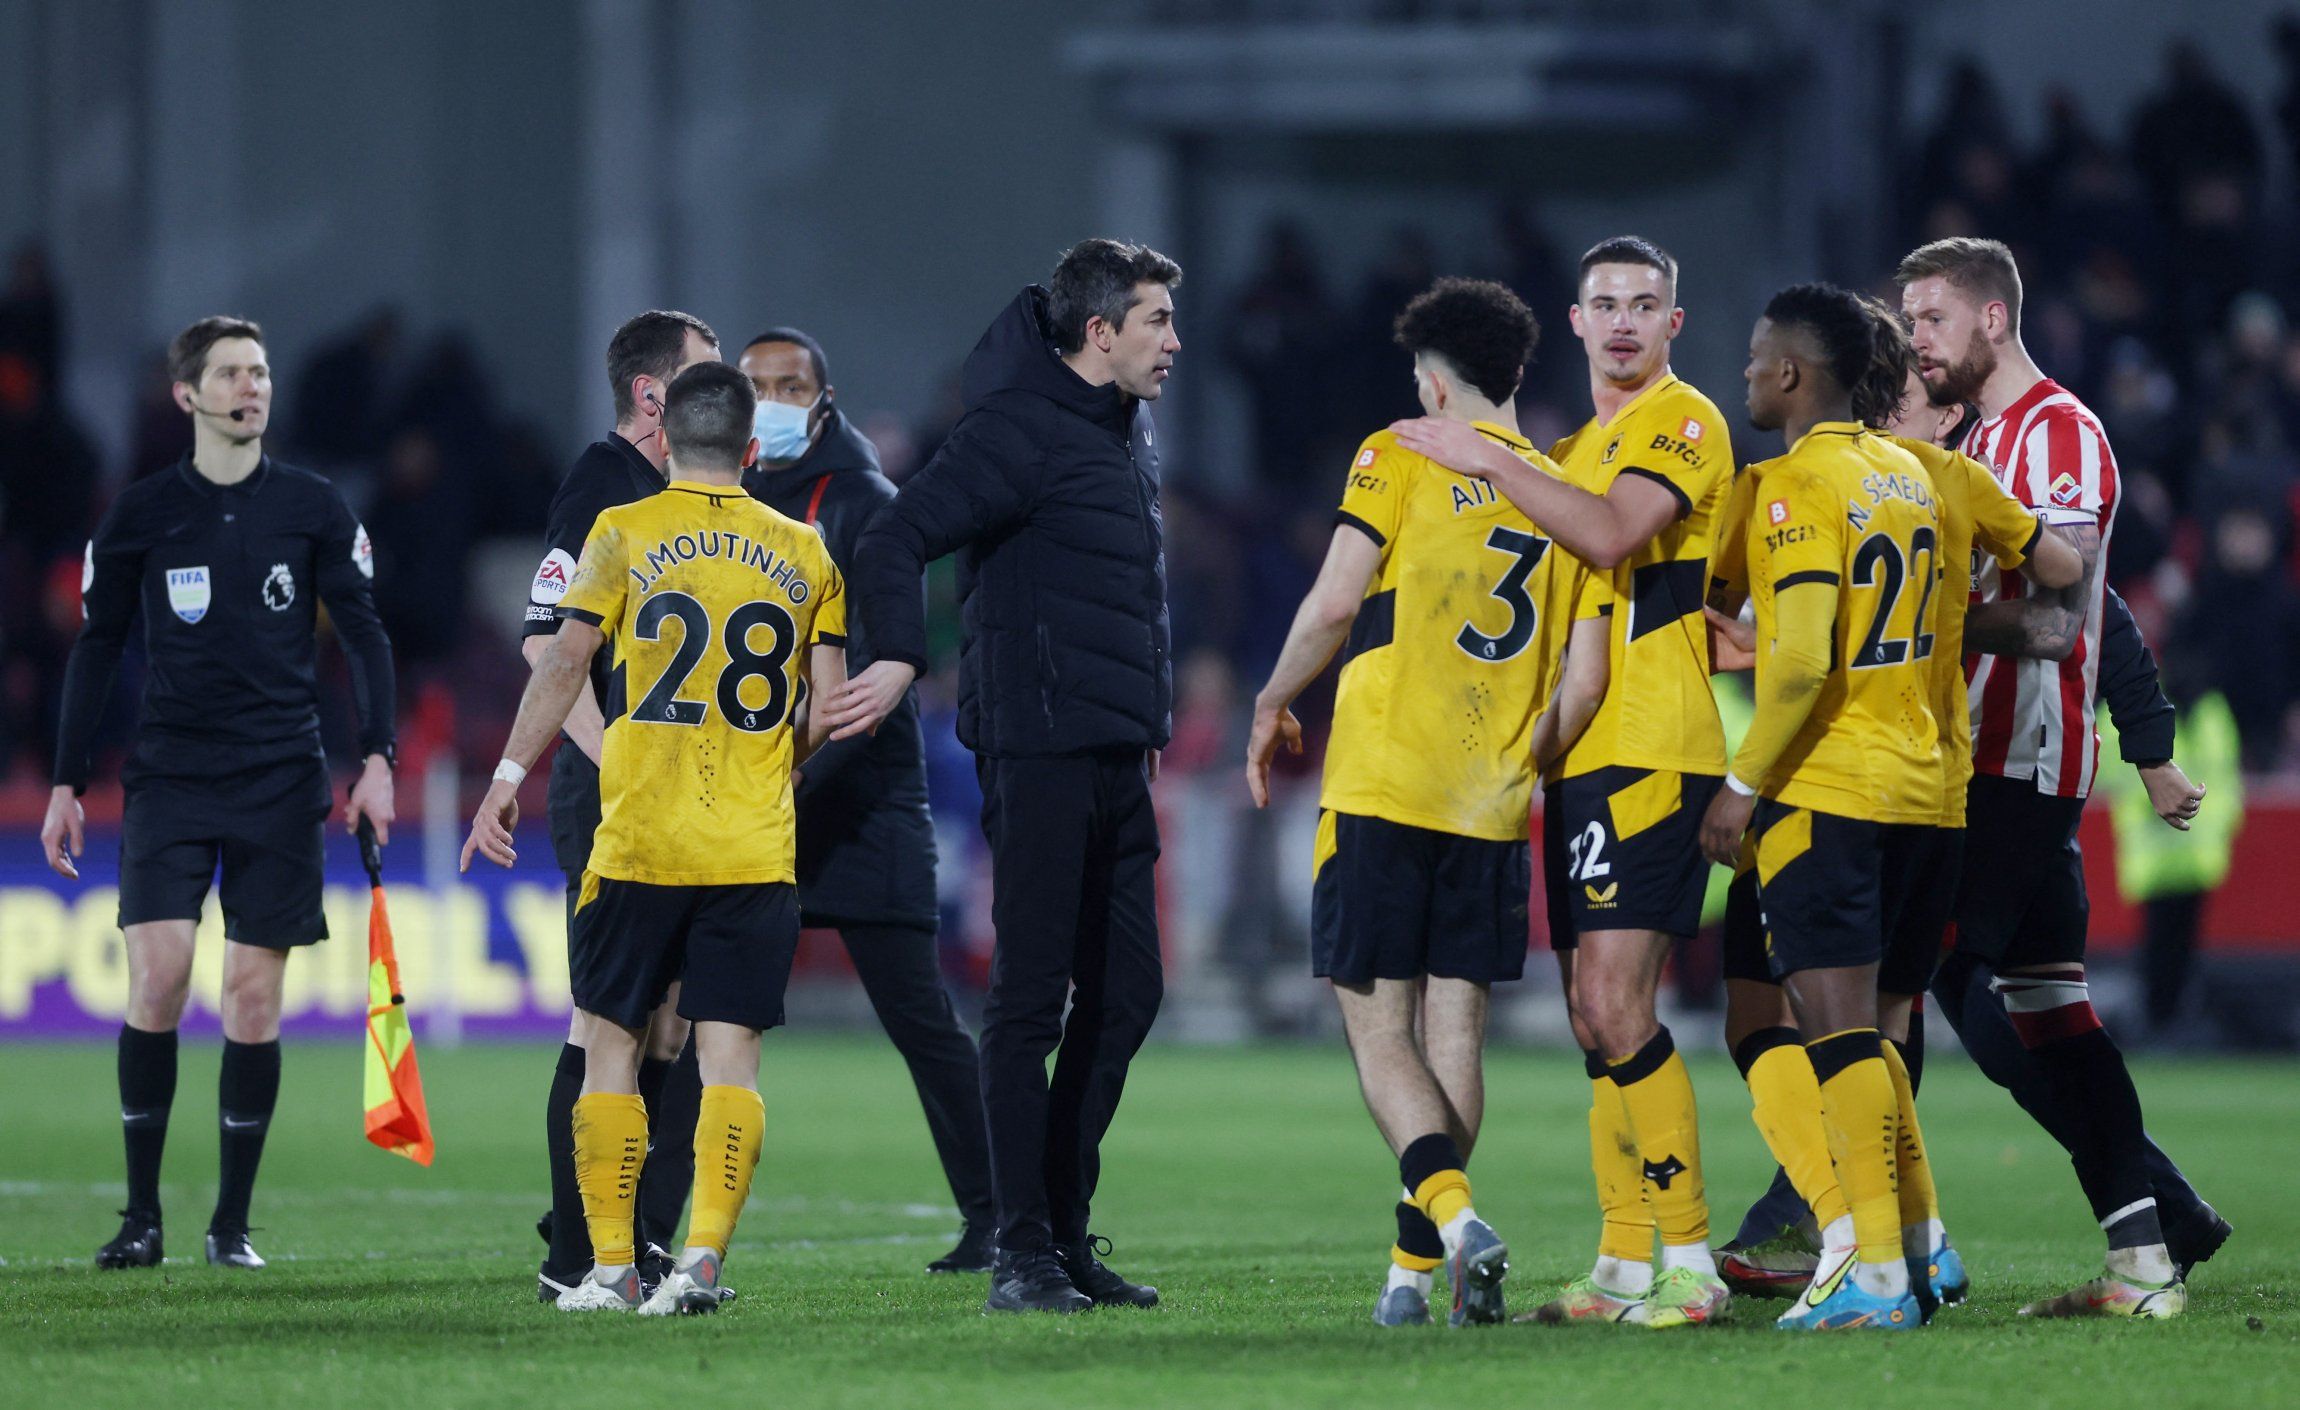 Bruno Lage, Fosun, Jeff Shi, Molineux, The Old Gold, Wolves, Wolves fans, Wolves info, Wolves latest, Wolves news, Wolves updates, WWFC, WWFC news, WWFC update, Premier League, Premier League news, Wolverhampton Wanderers, Wolves transfer news, Chalkboard, Chiquinho, Norwich City, FA Cup, 
